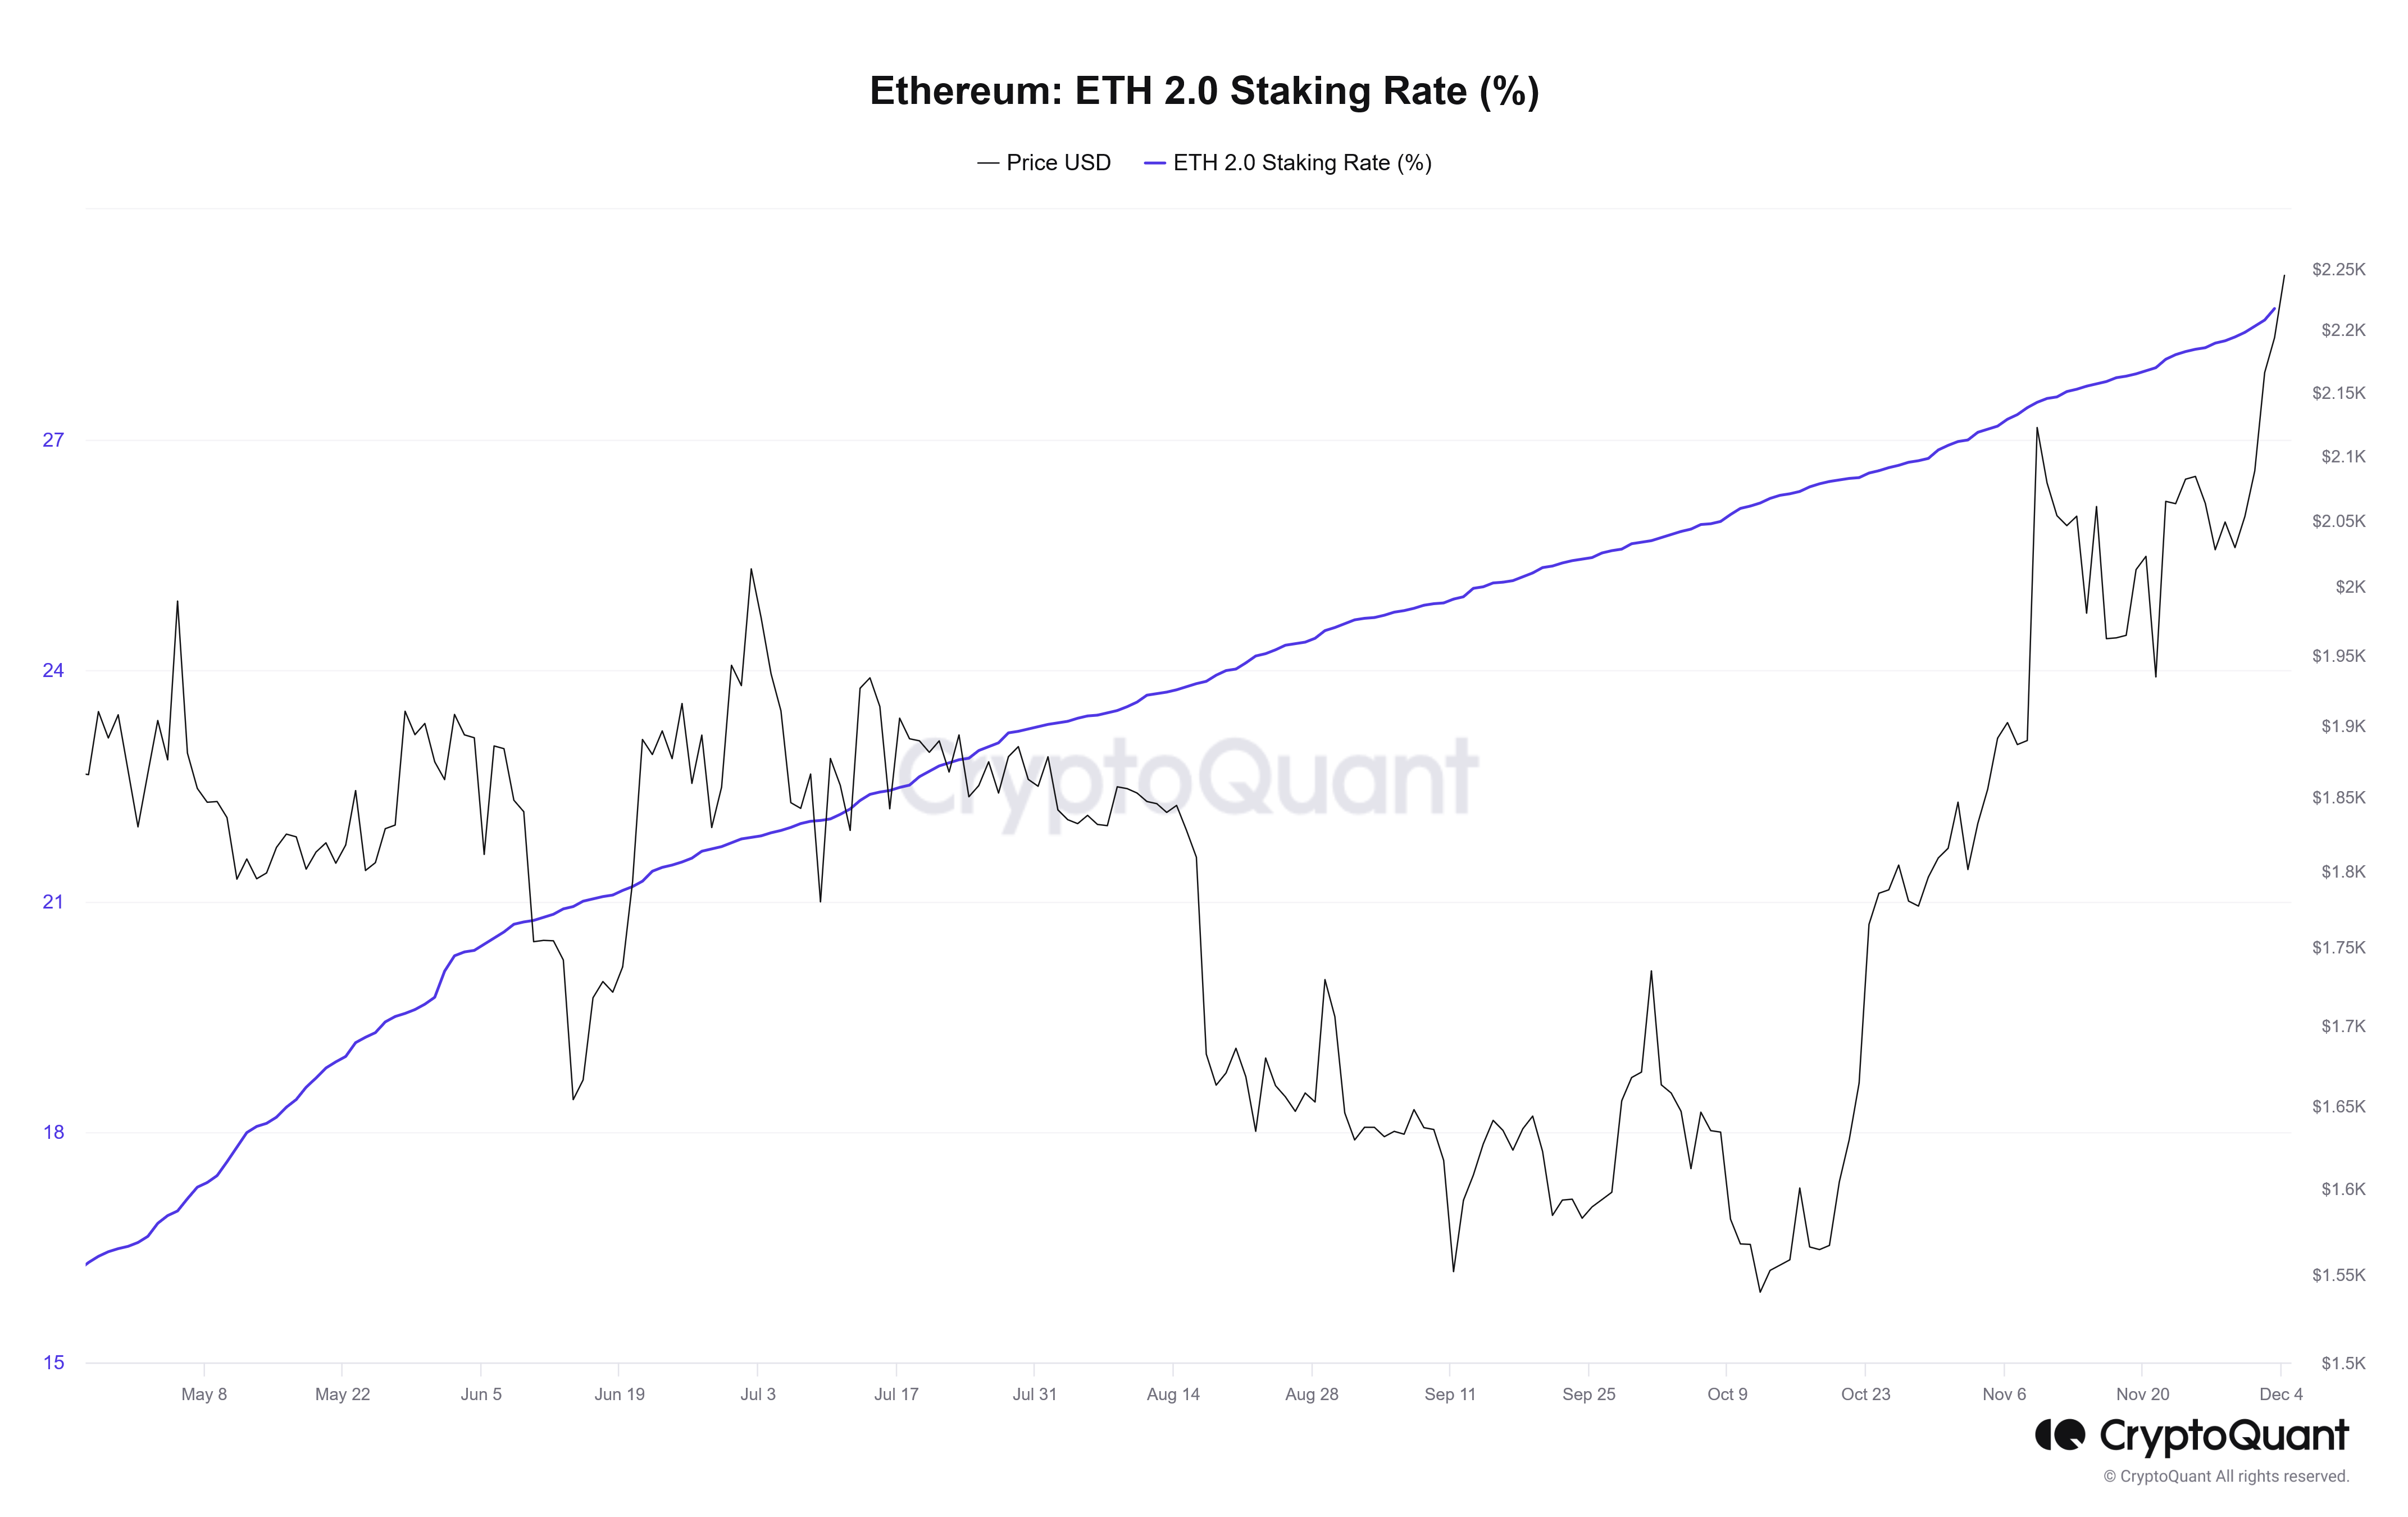 Ethereum staking rate over time.  Source: CryptoQuant